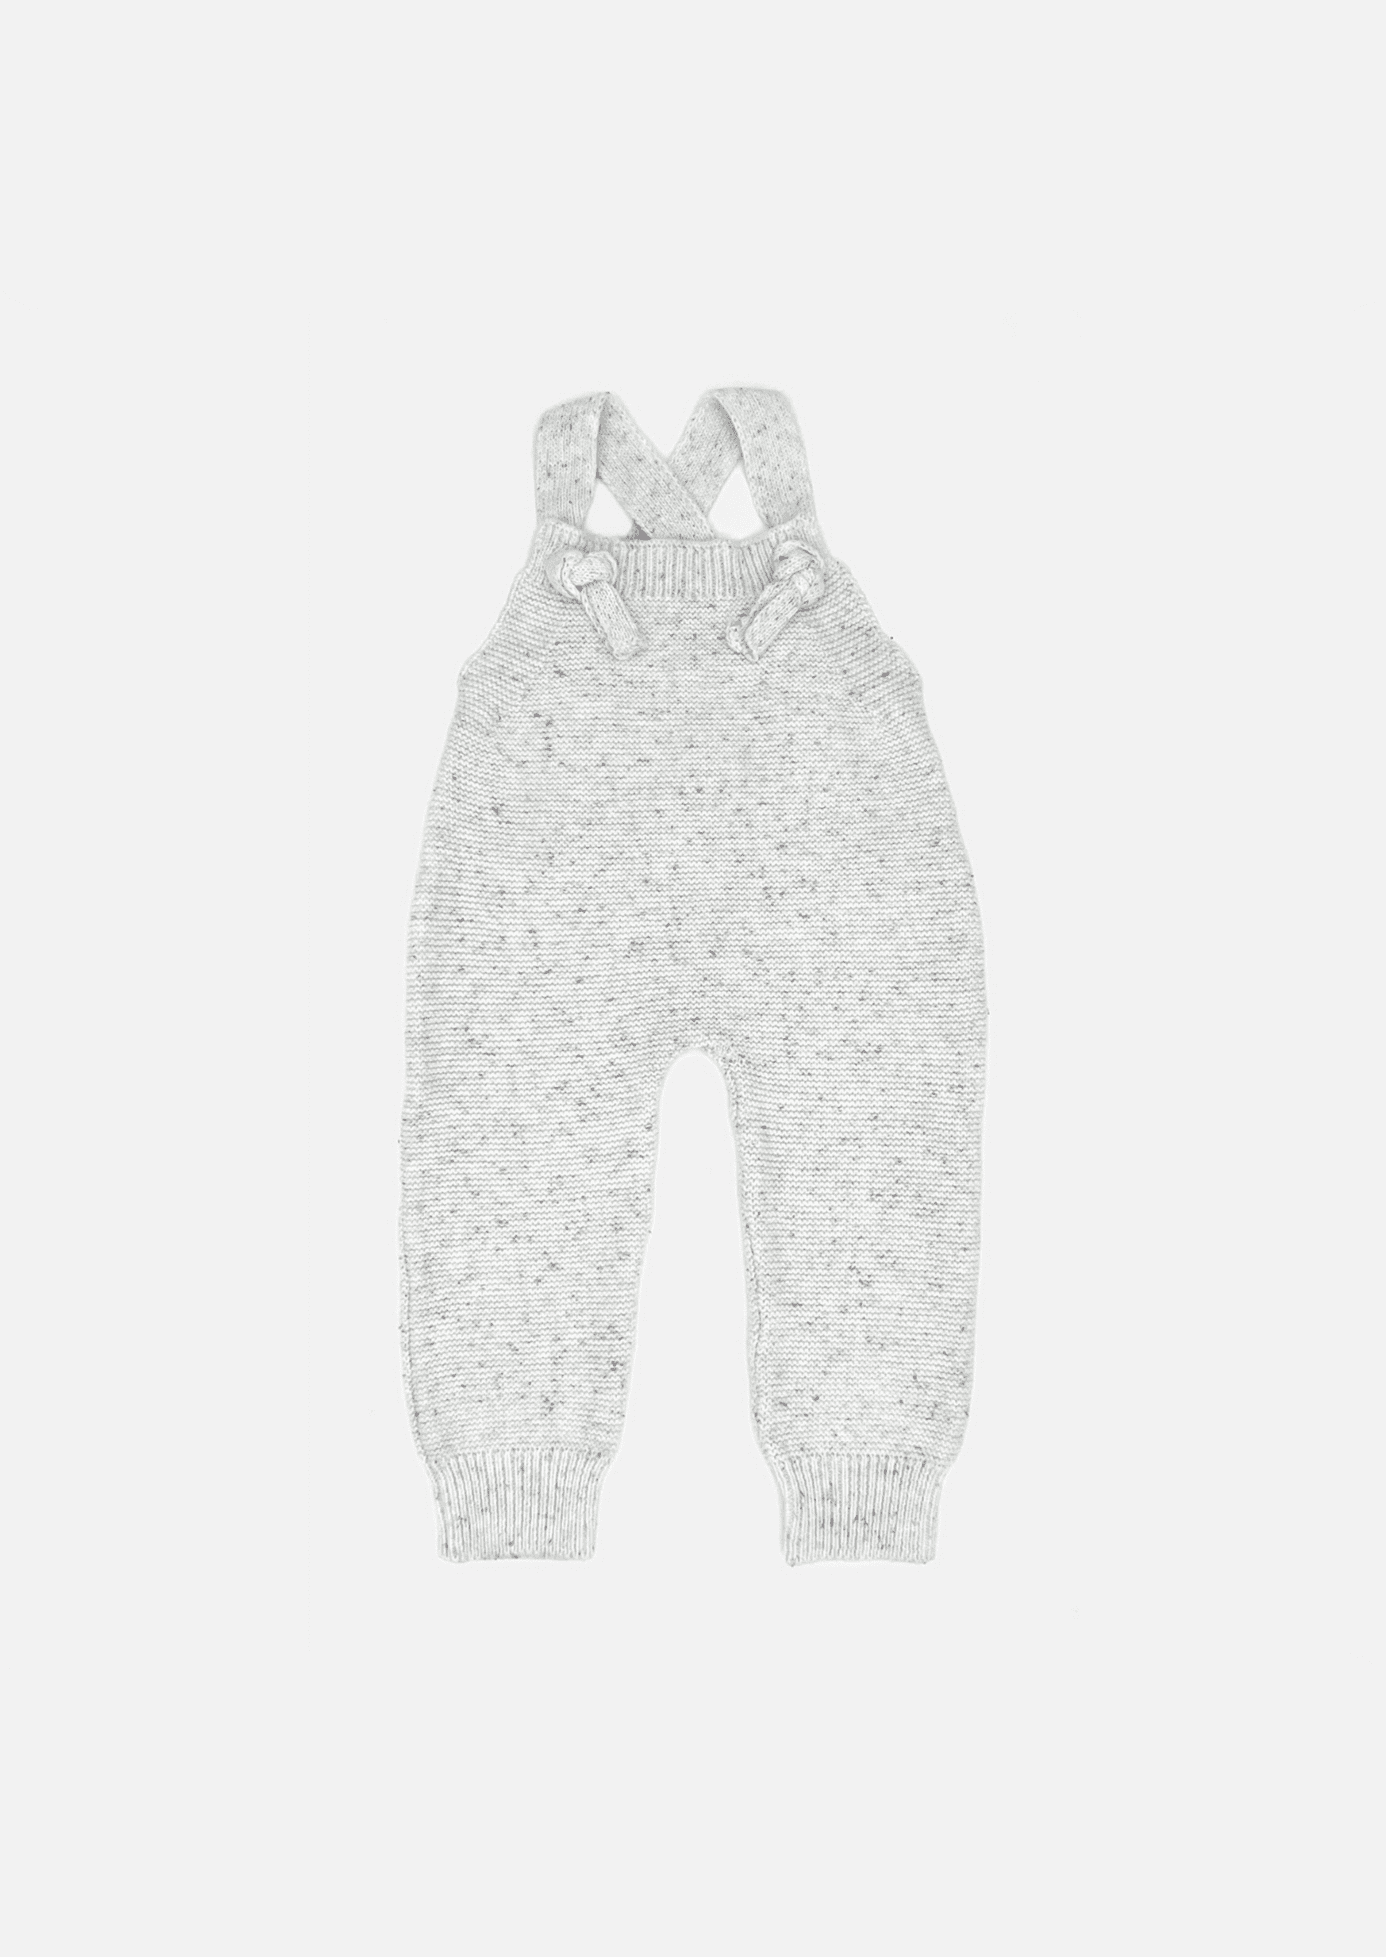 Purl Knit Overalls | Frosted Sprinkles - Mila &amp; Co.